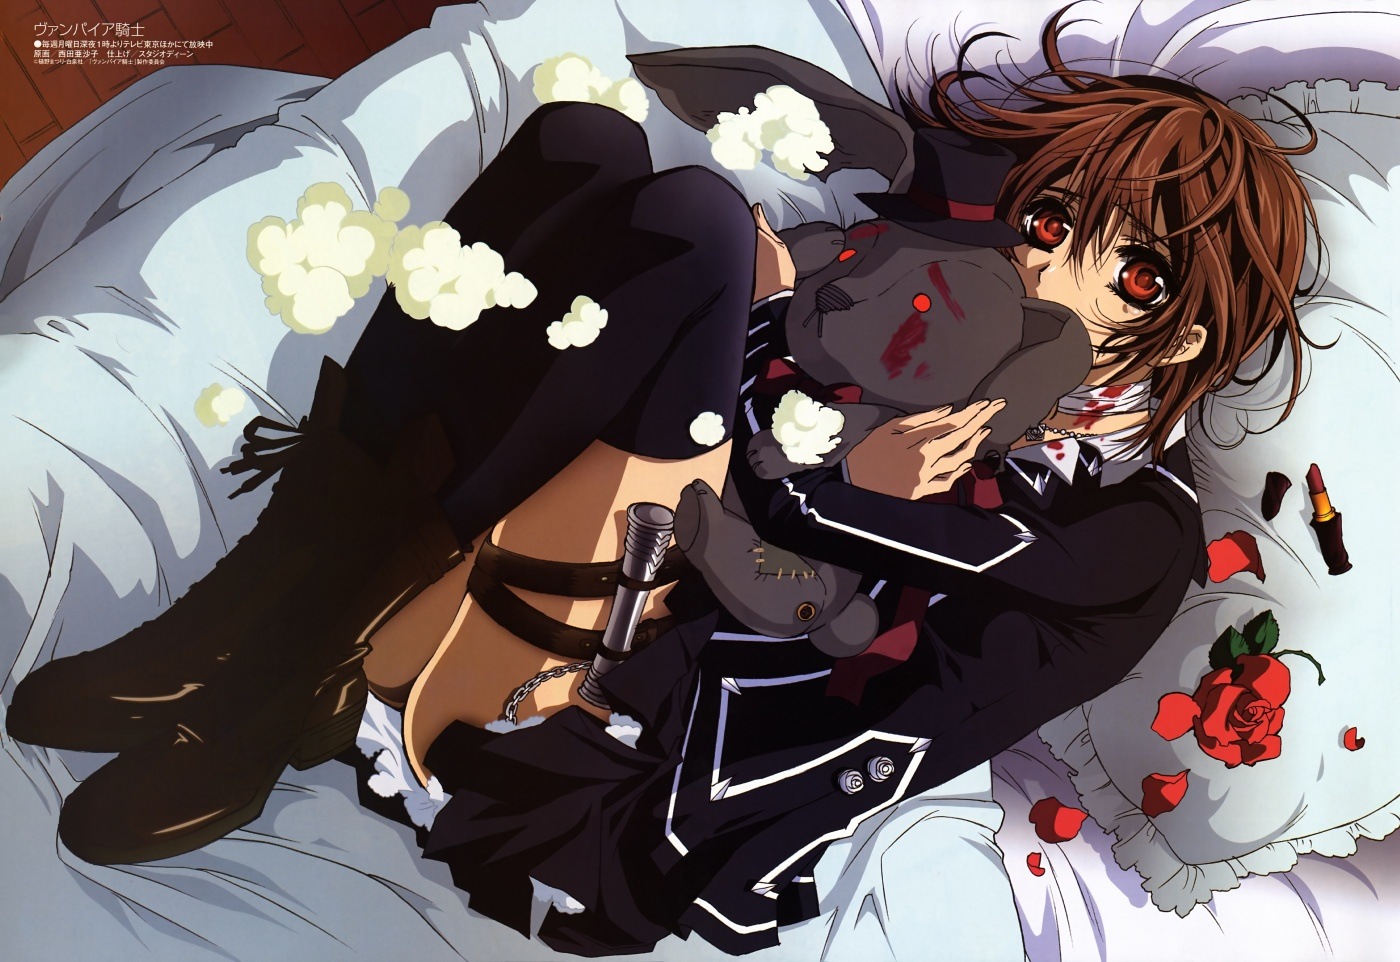 Vampire Knight still suffers from points of rubbish animation but hey,